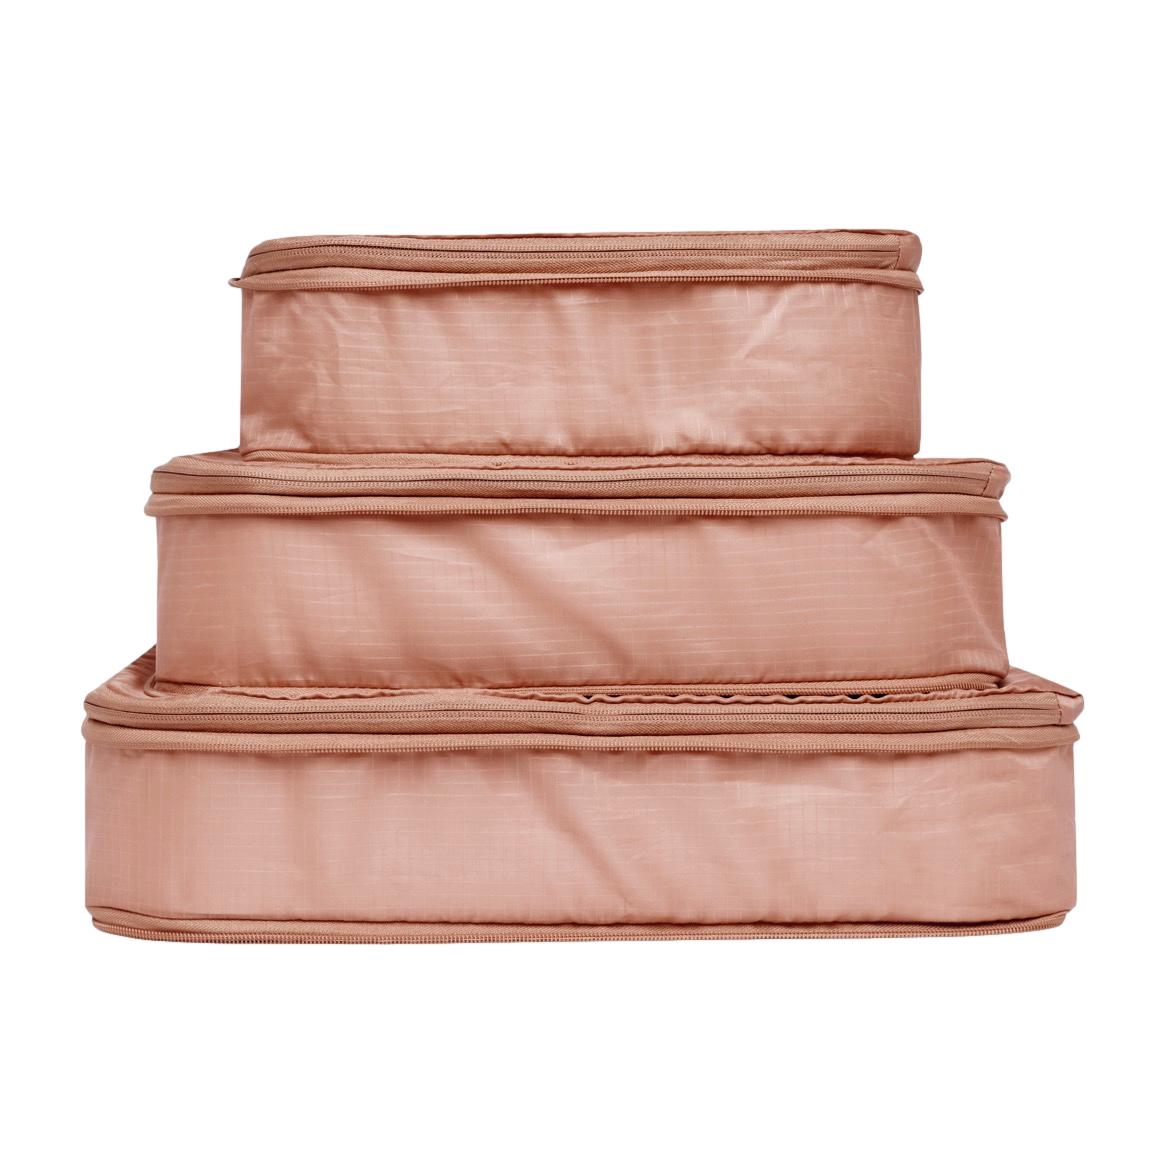 Re-cycled and Reinforced Nylon Compression Packing Cubes, 3-pack Pink/Blush